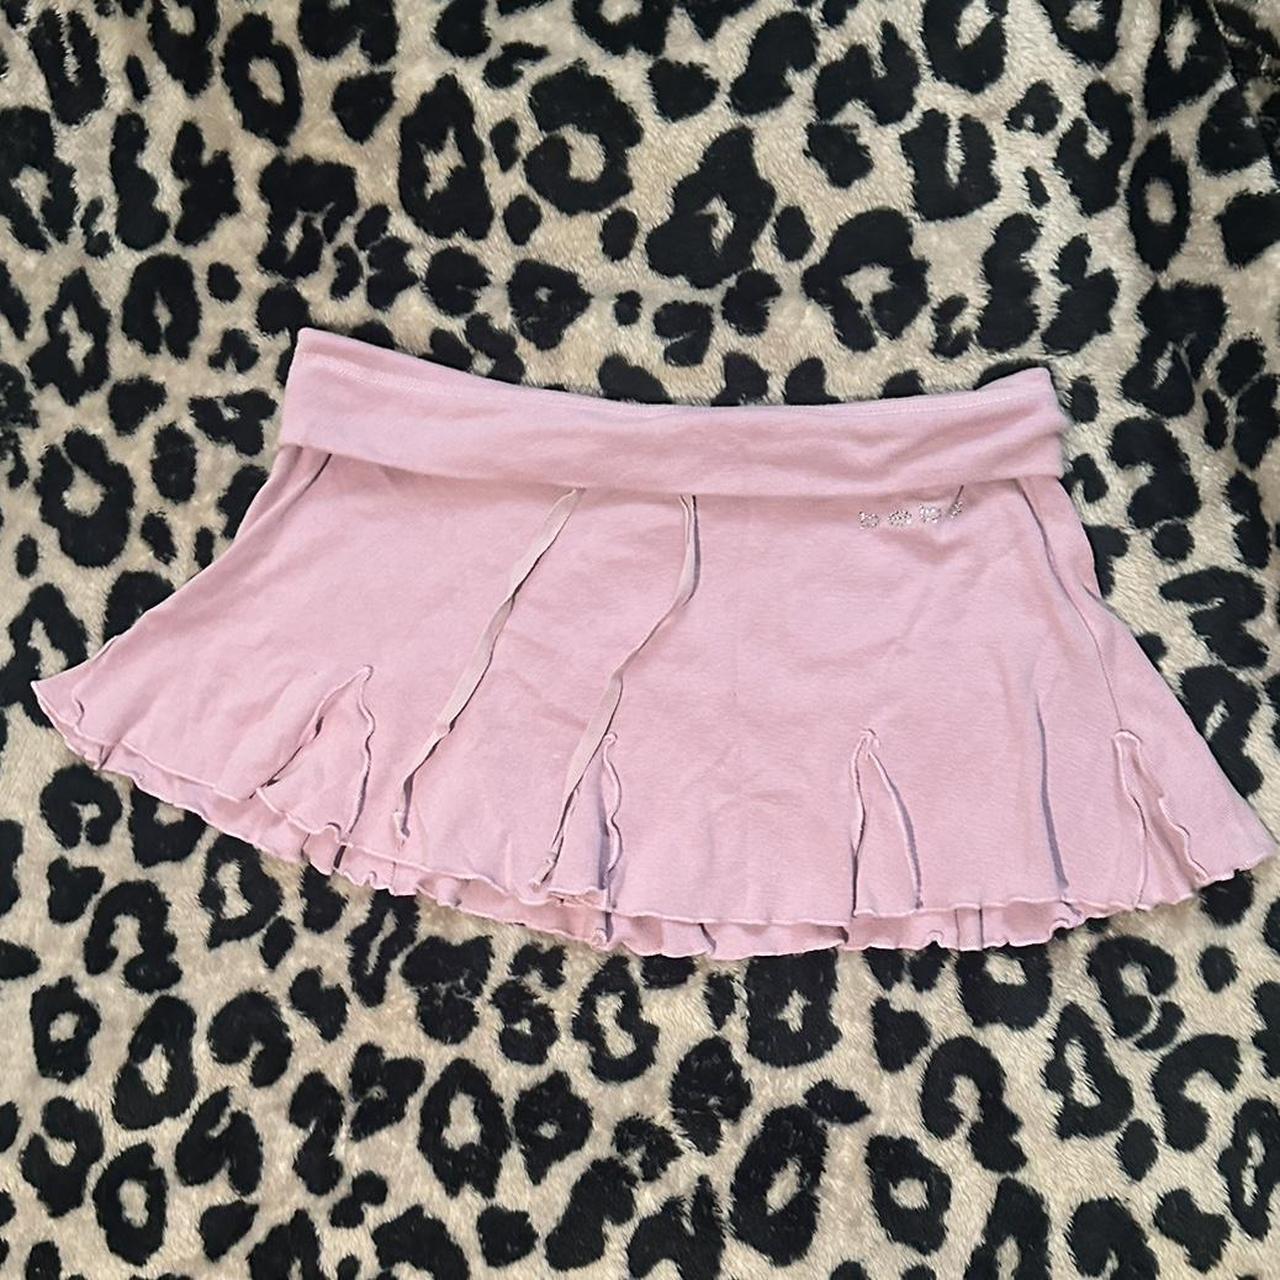 red urban coco skater skirt never worn, only tried - Depop